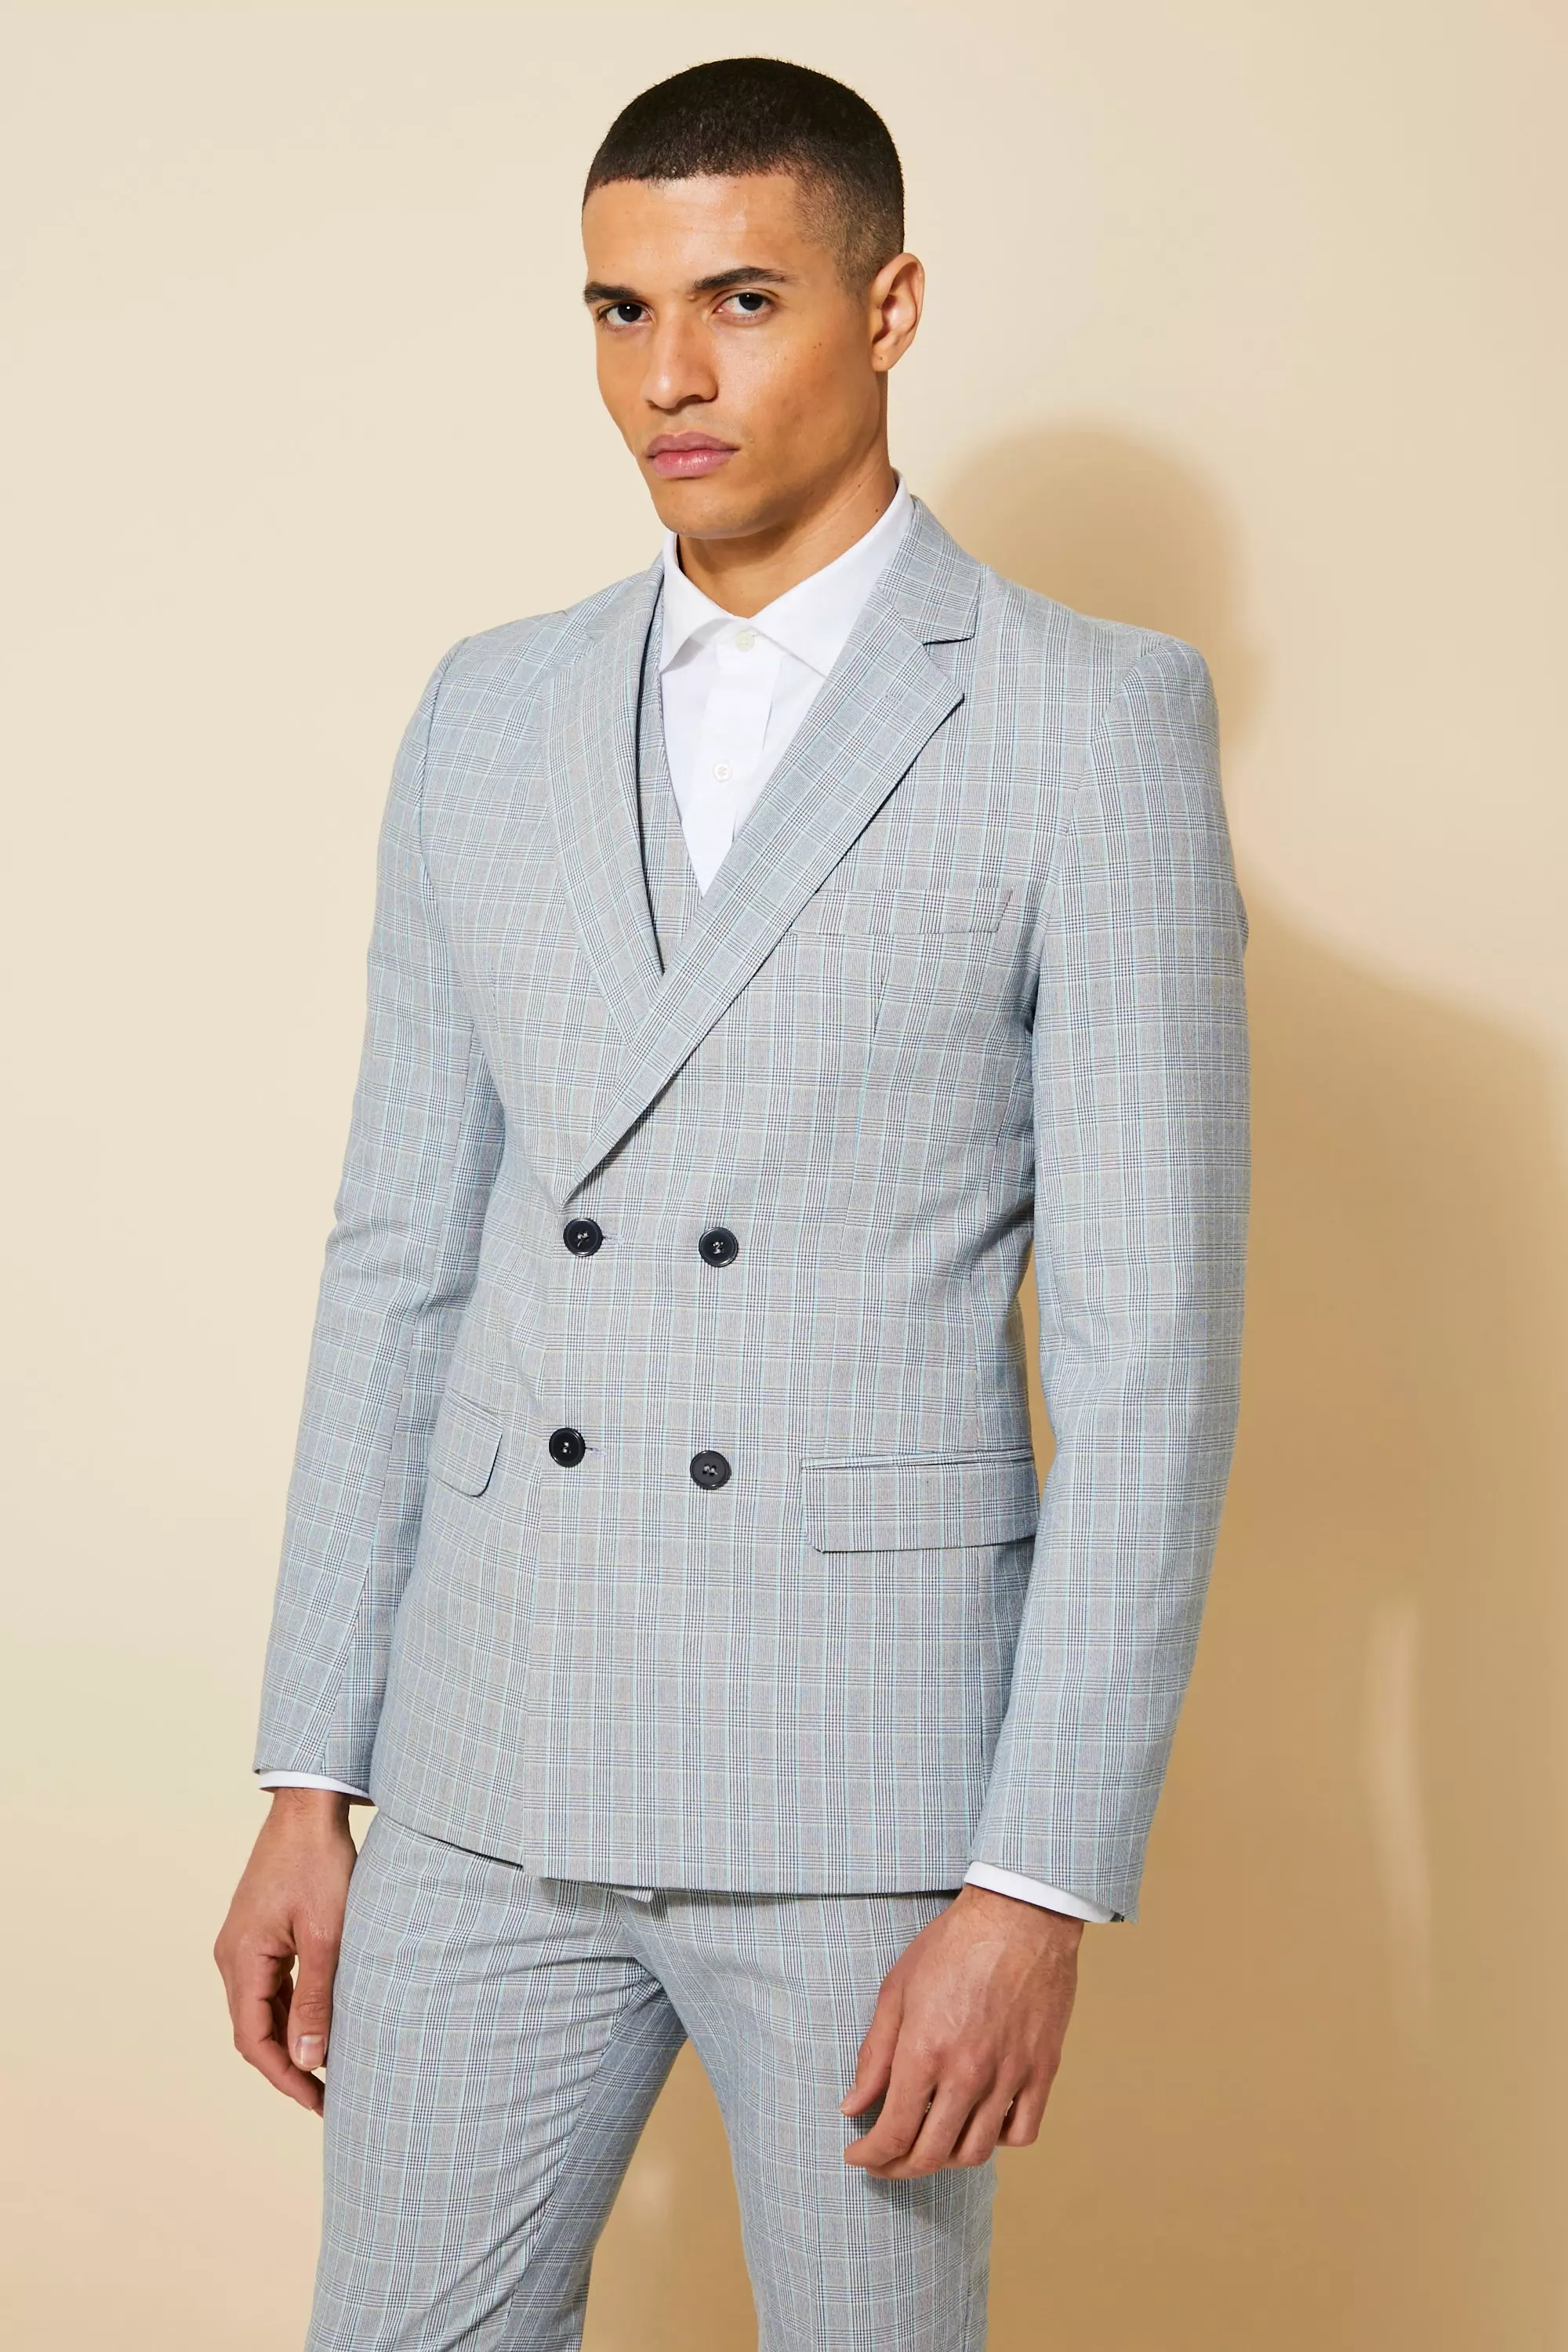 boohooMAN Tall Slim Double Breasted Suit Jacket - Gray - Size 40